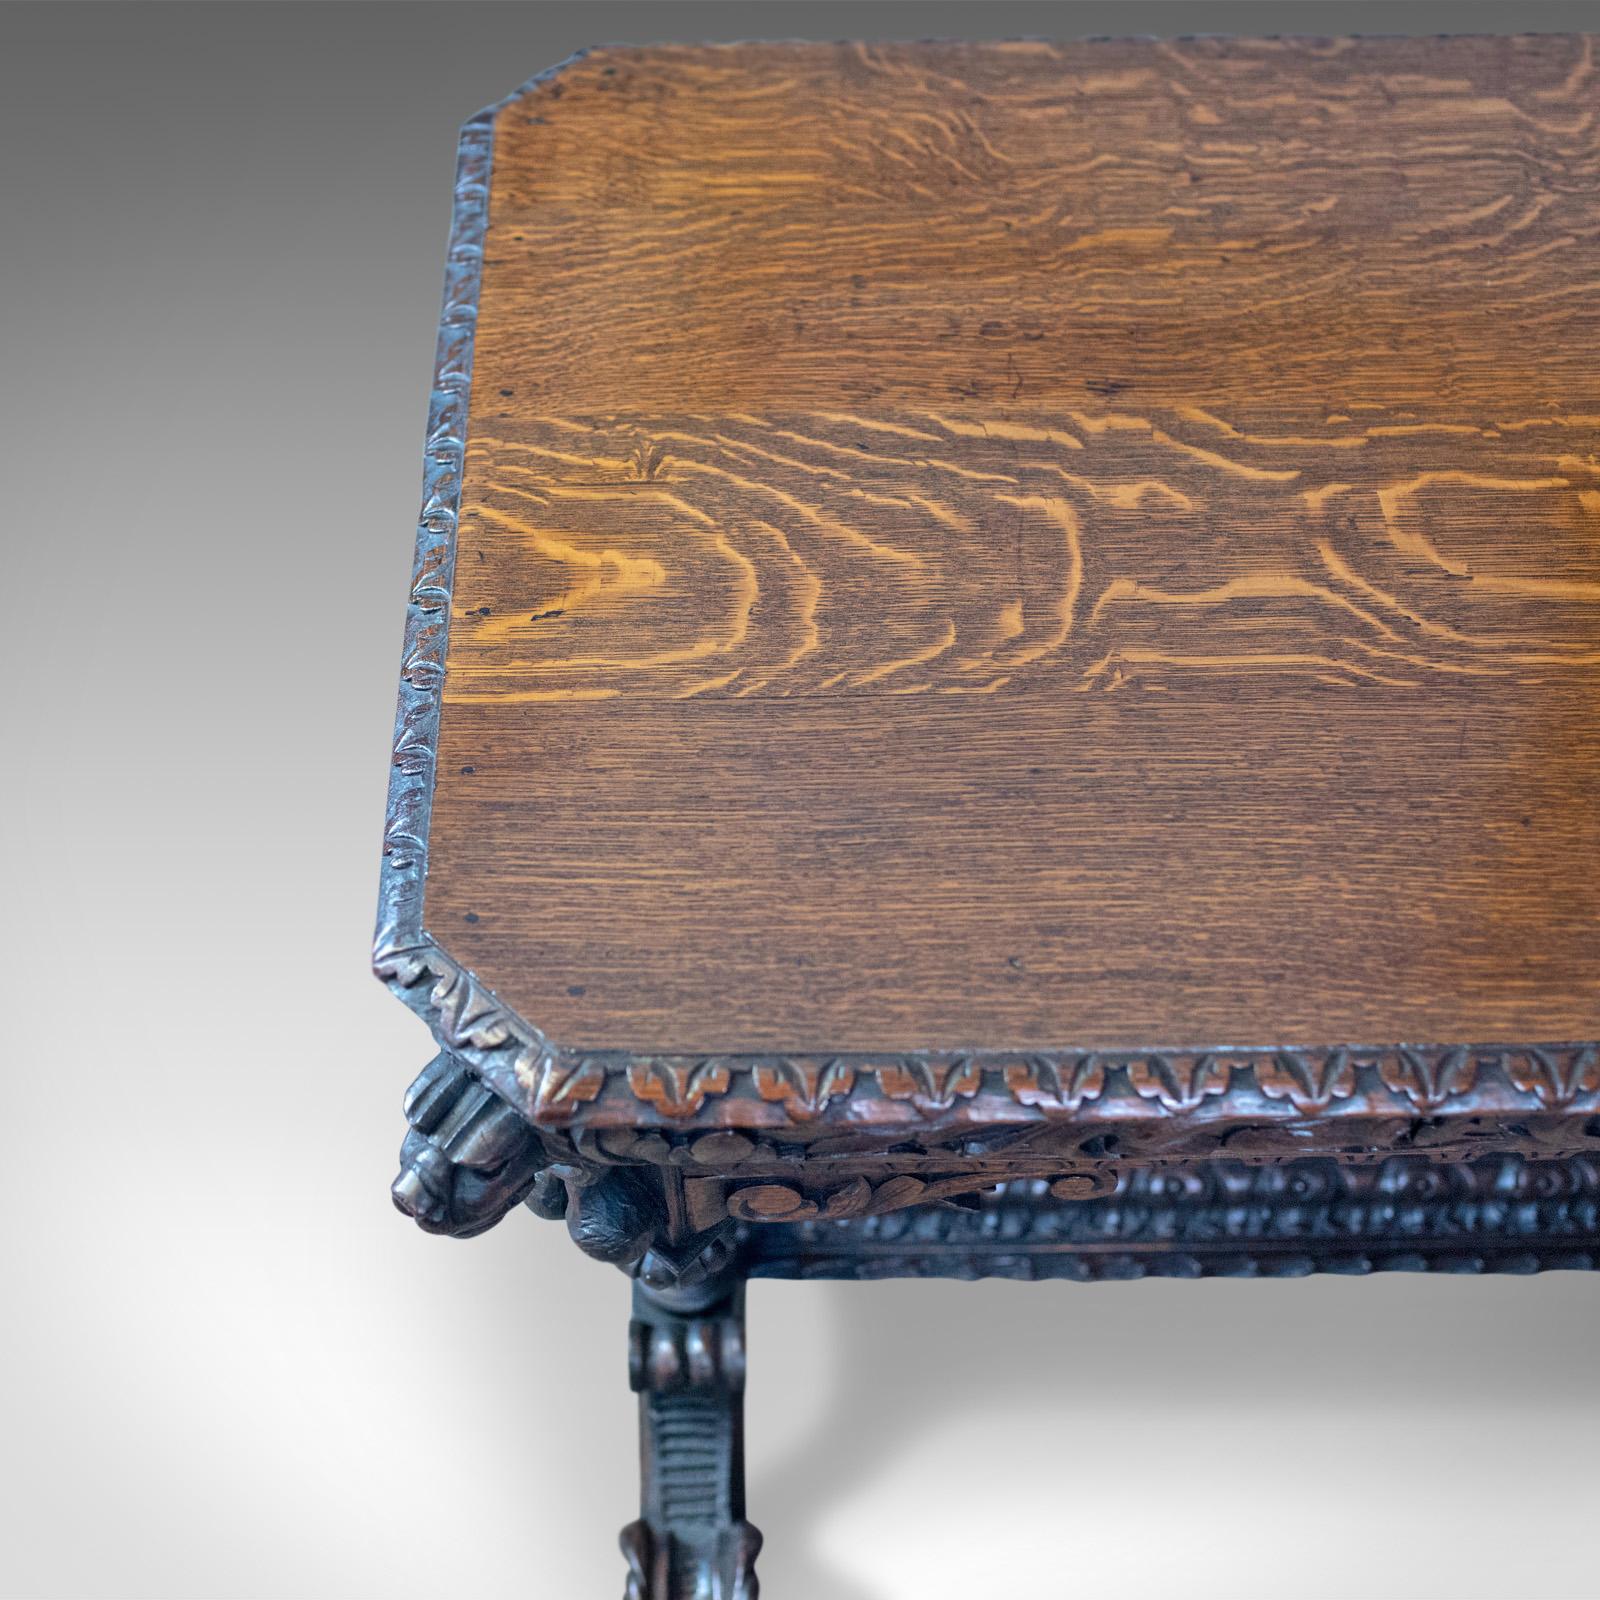 19th Century Library Table Victorian Gothic Revival Scottish Oak Carved Side, circa 1880